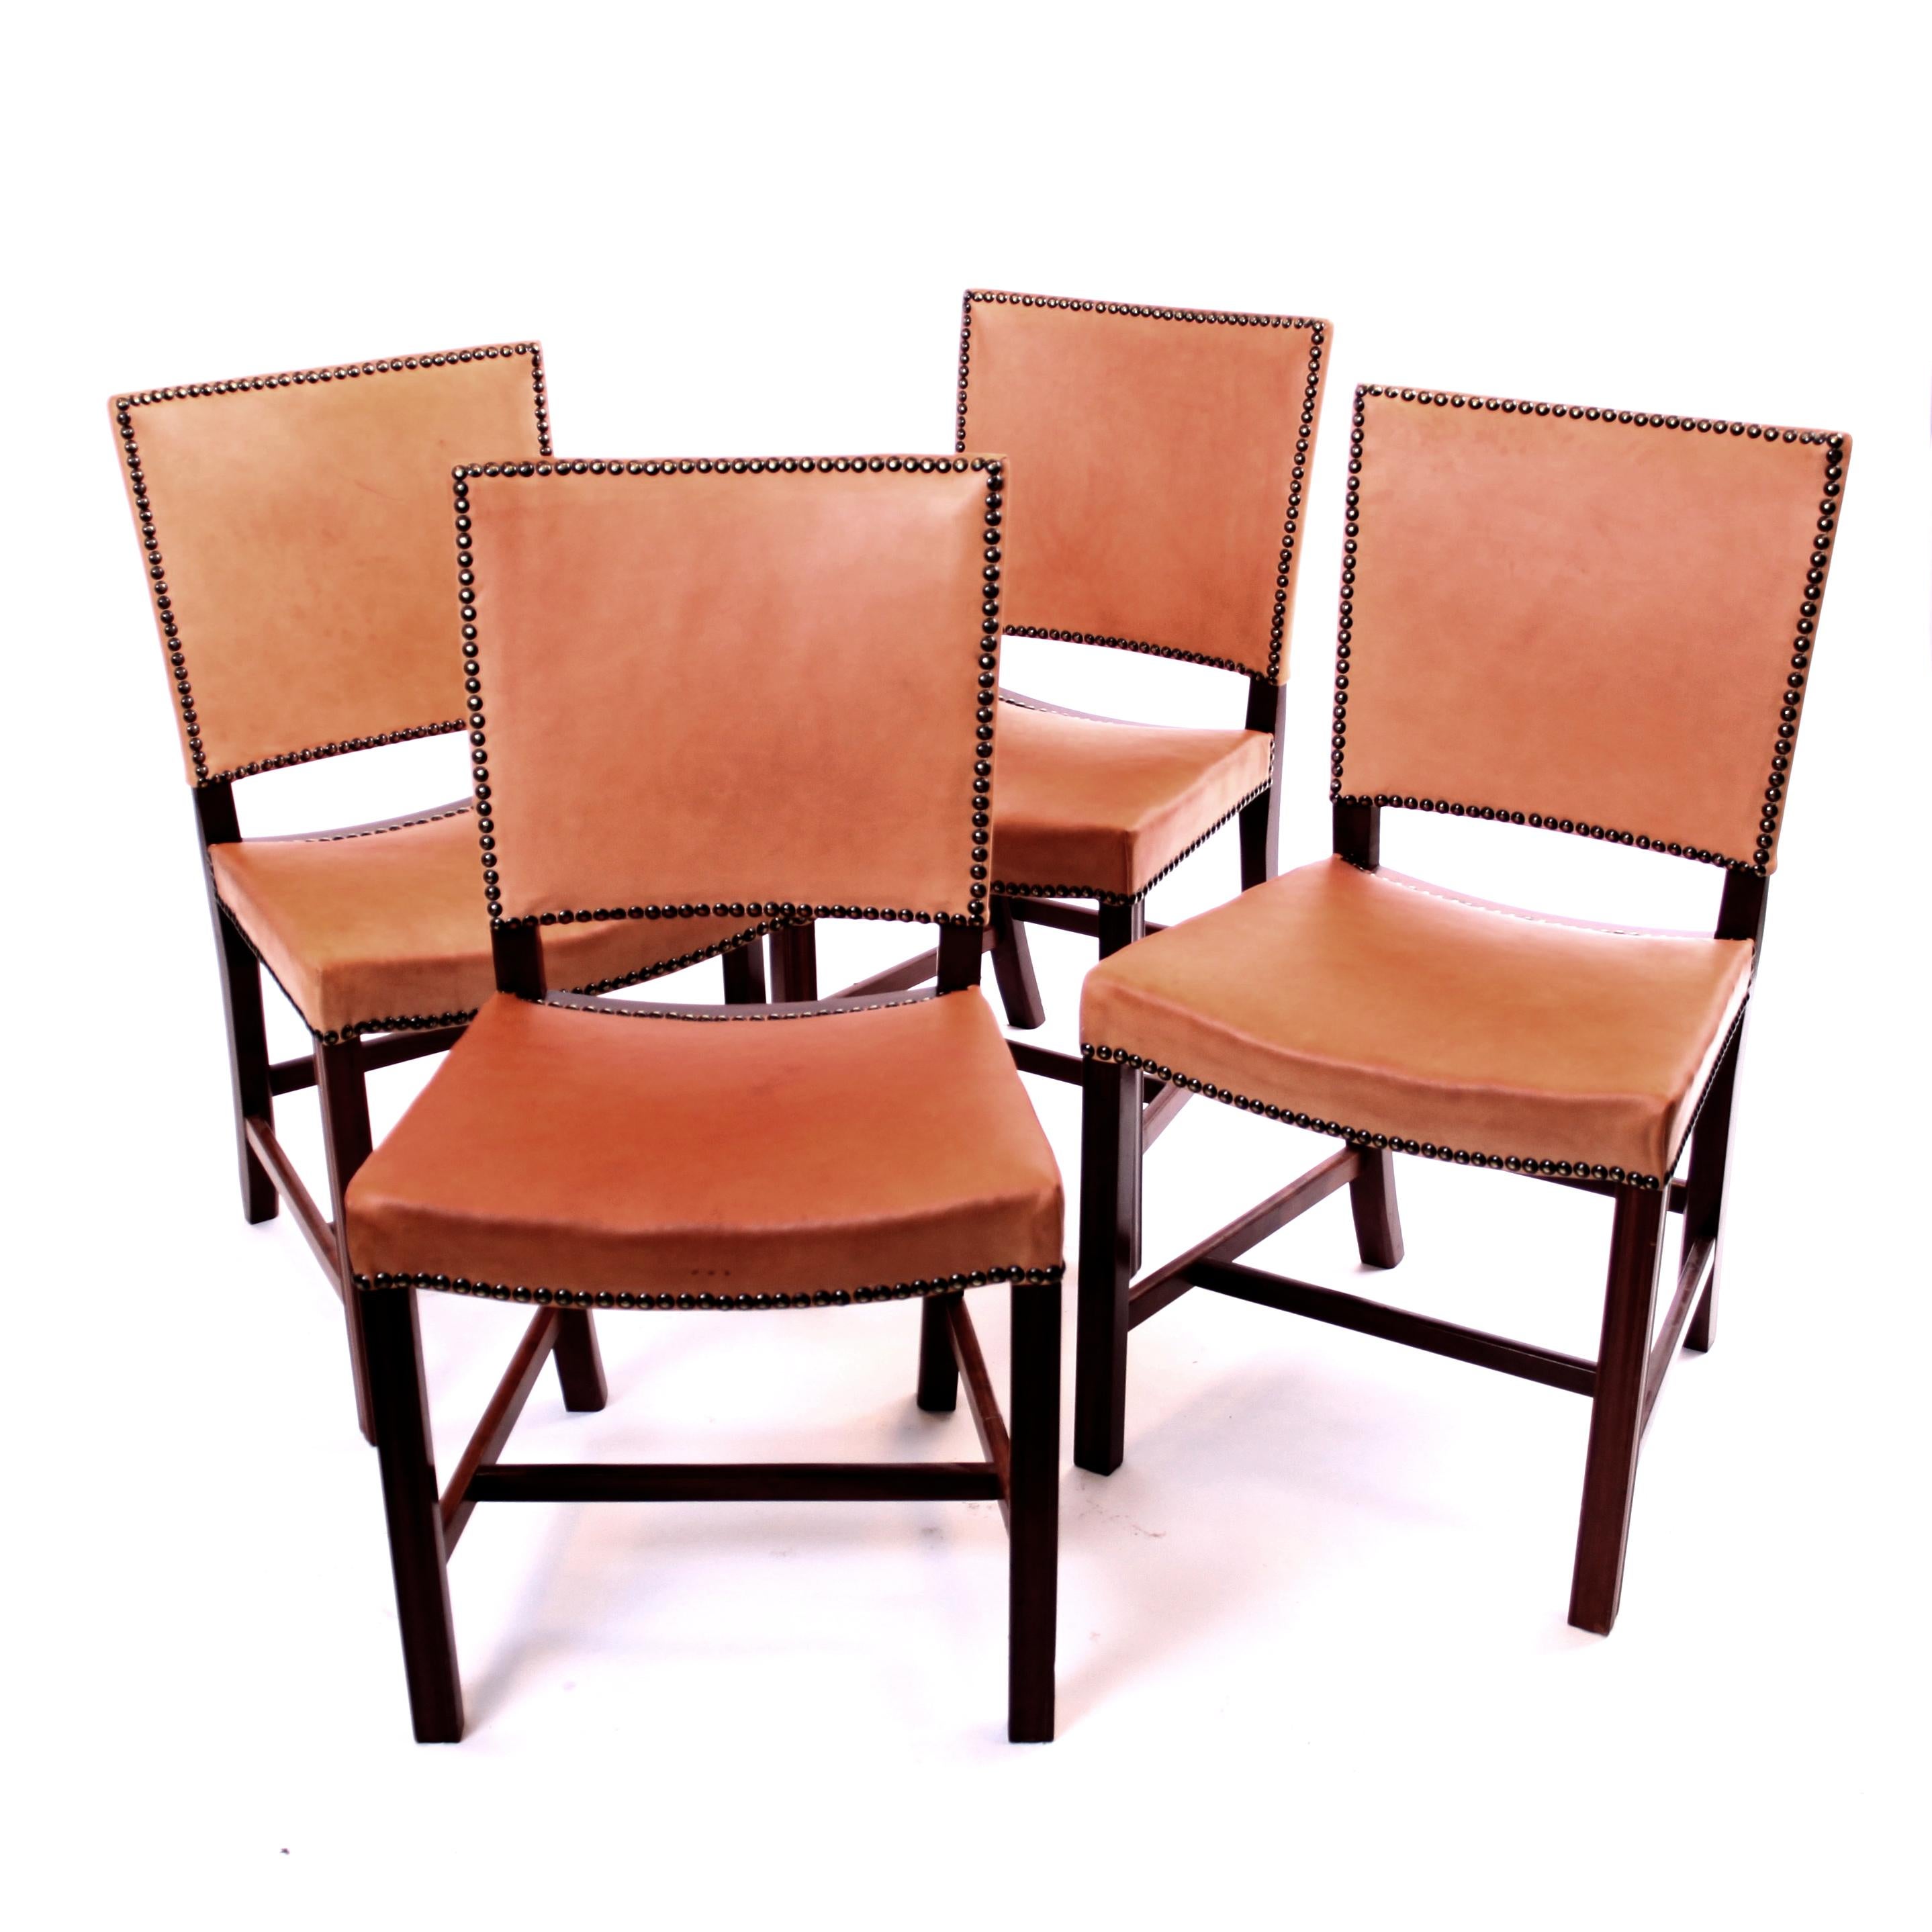 Kaare Klint & Rud Rasmussen - Mid-Century Modern design/ Scandinavian Modern

A set of four of the icomic Kaare Klint 'Red Chairs' or 'Barcelona Chairs'.

Profiled legs of mahogany, seat and back upholstered with patinated vegetable leather and